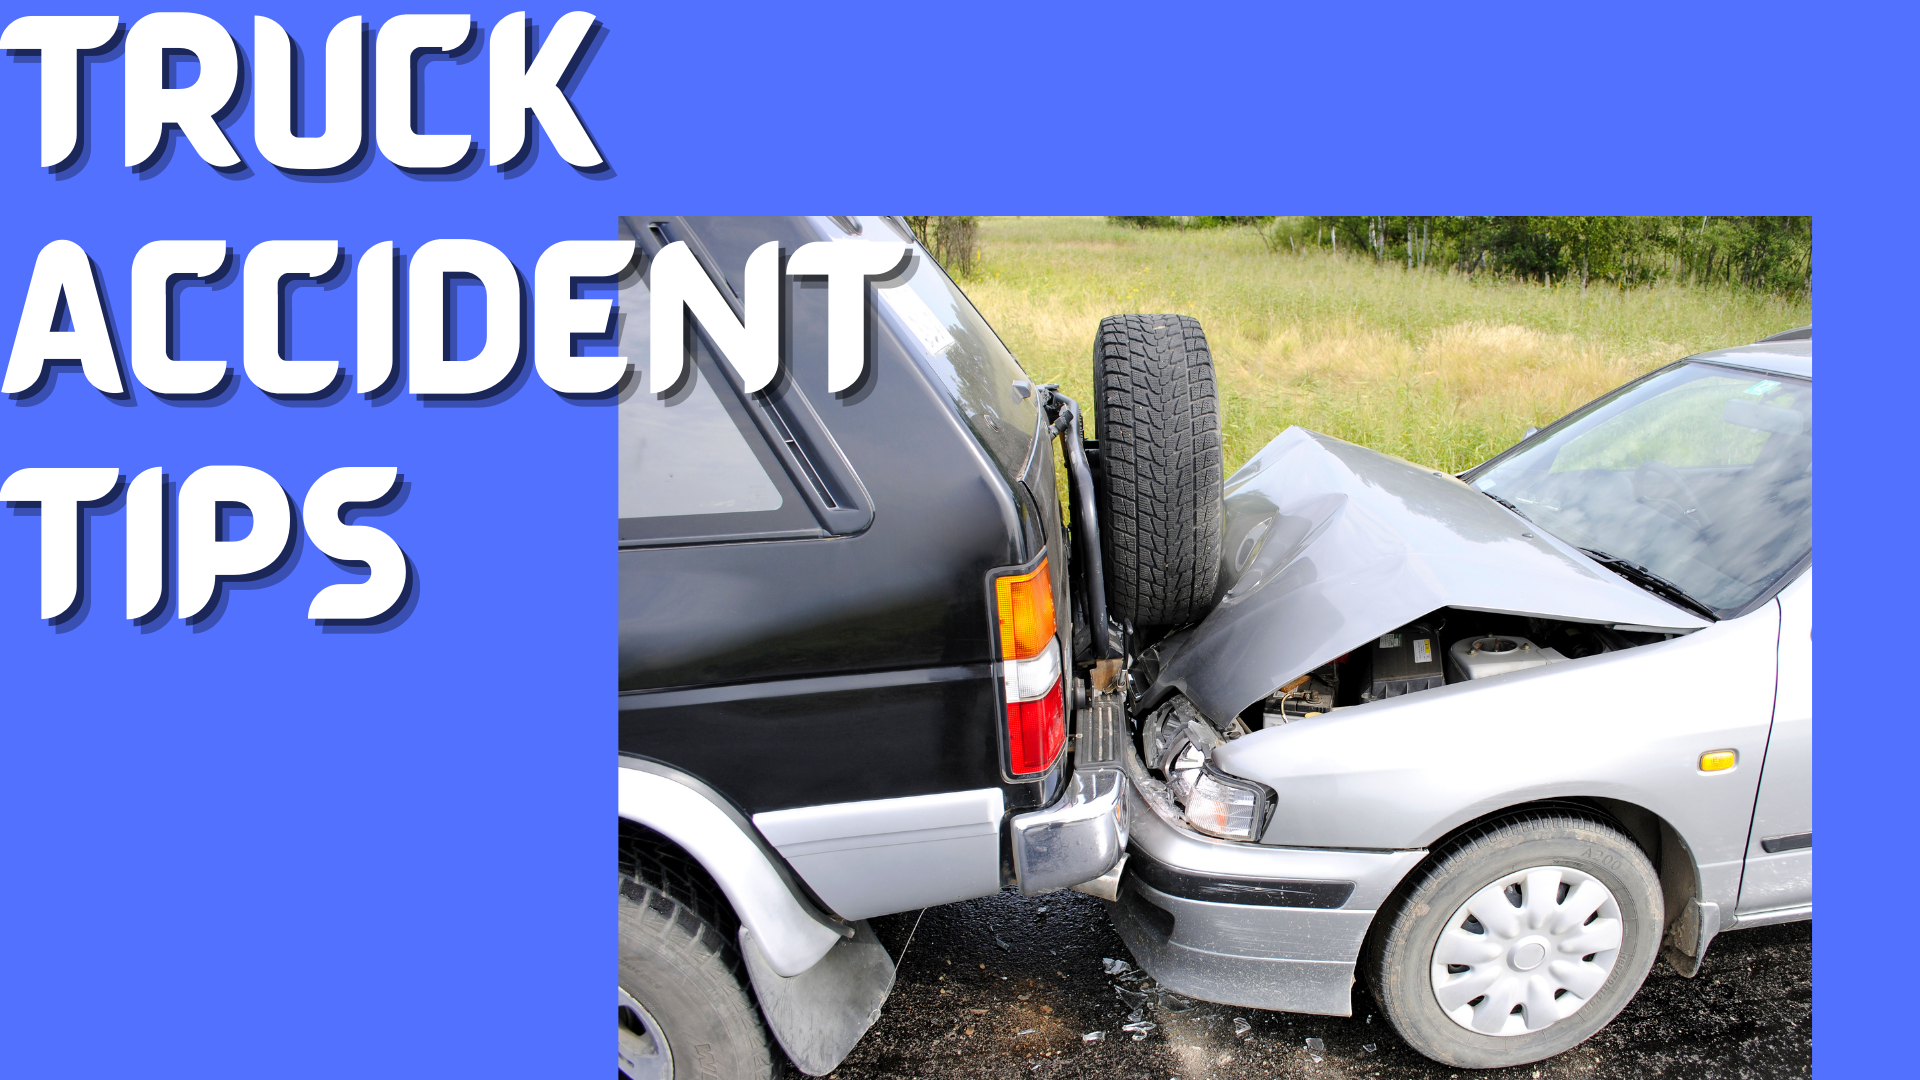 5 Important Truck Accident Tips – What To Do?